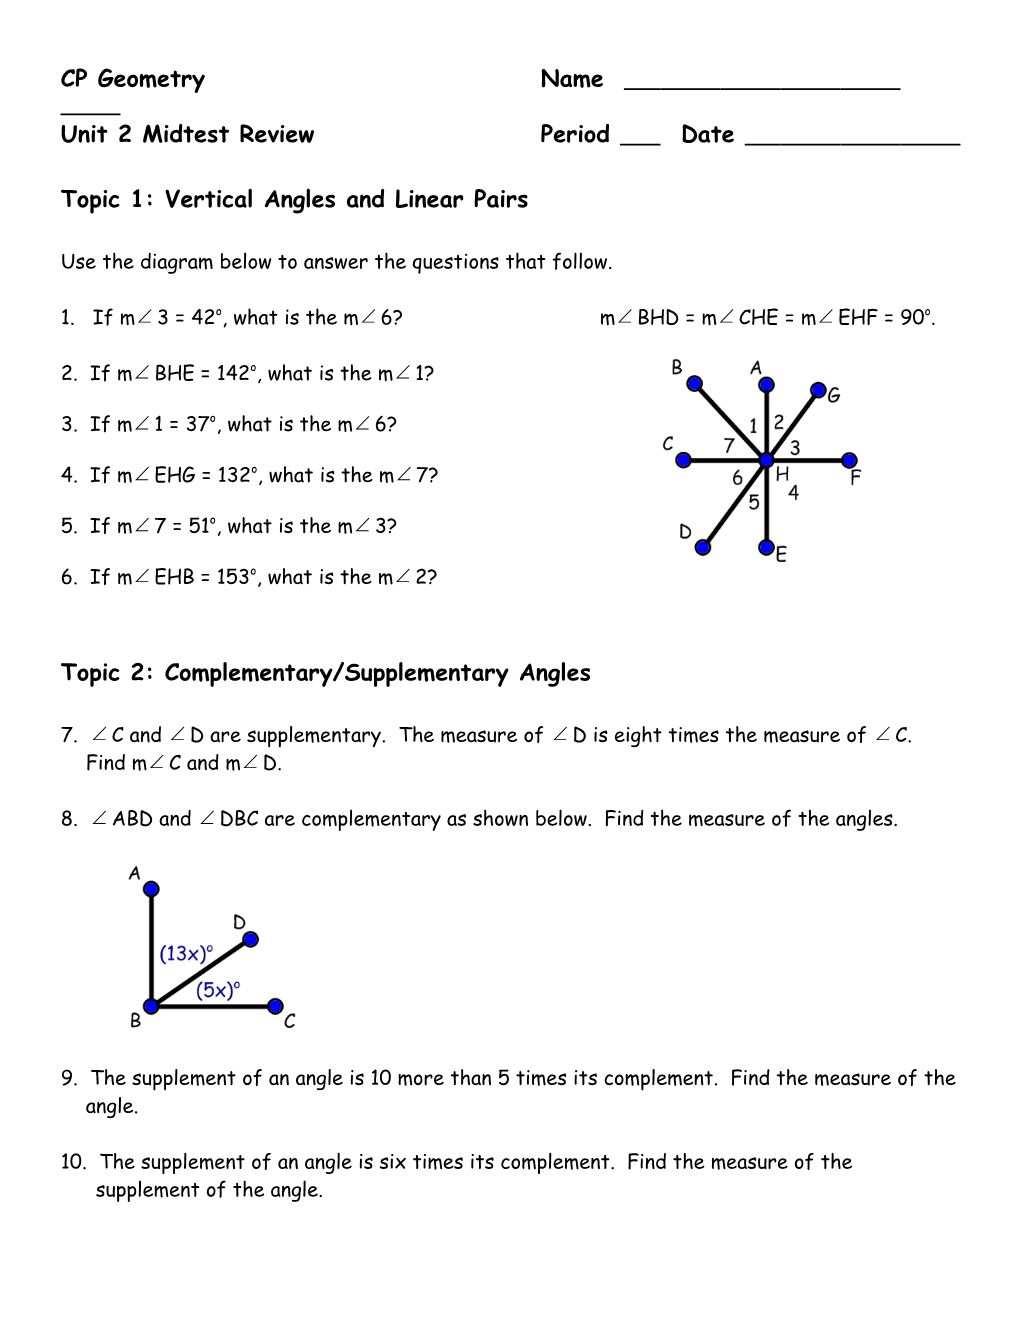 Topic 1: Vertical Angles and Linear Pairs